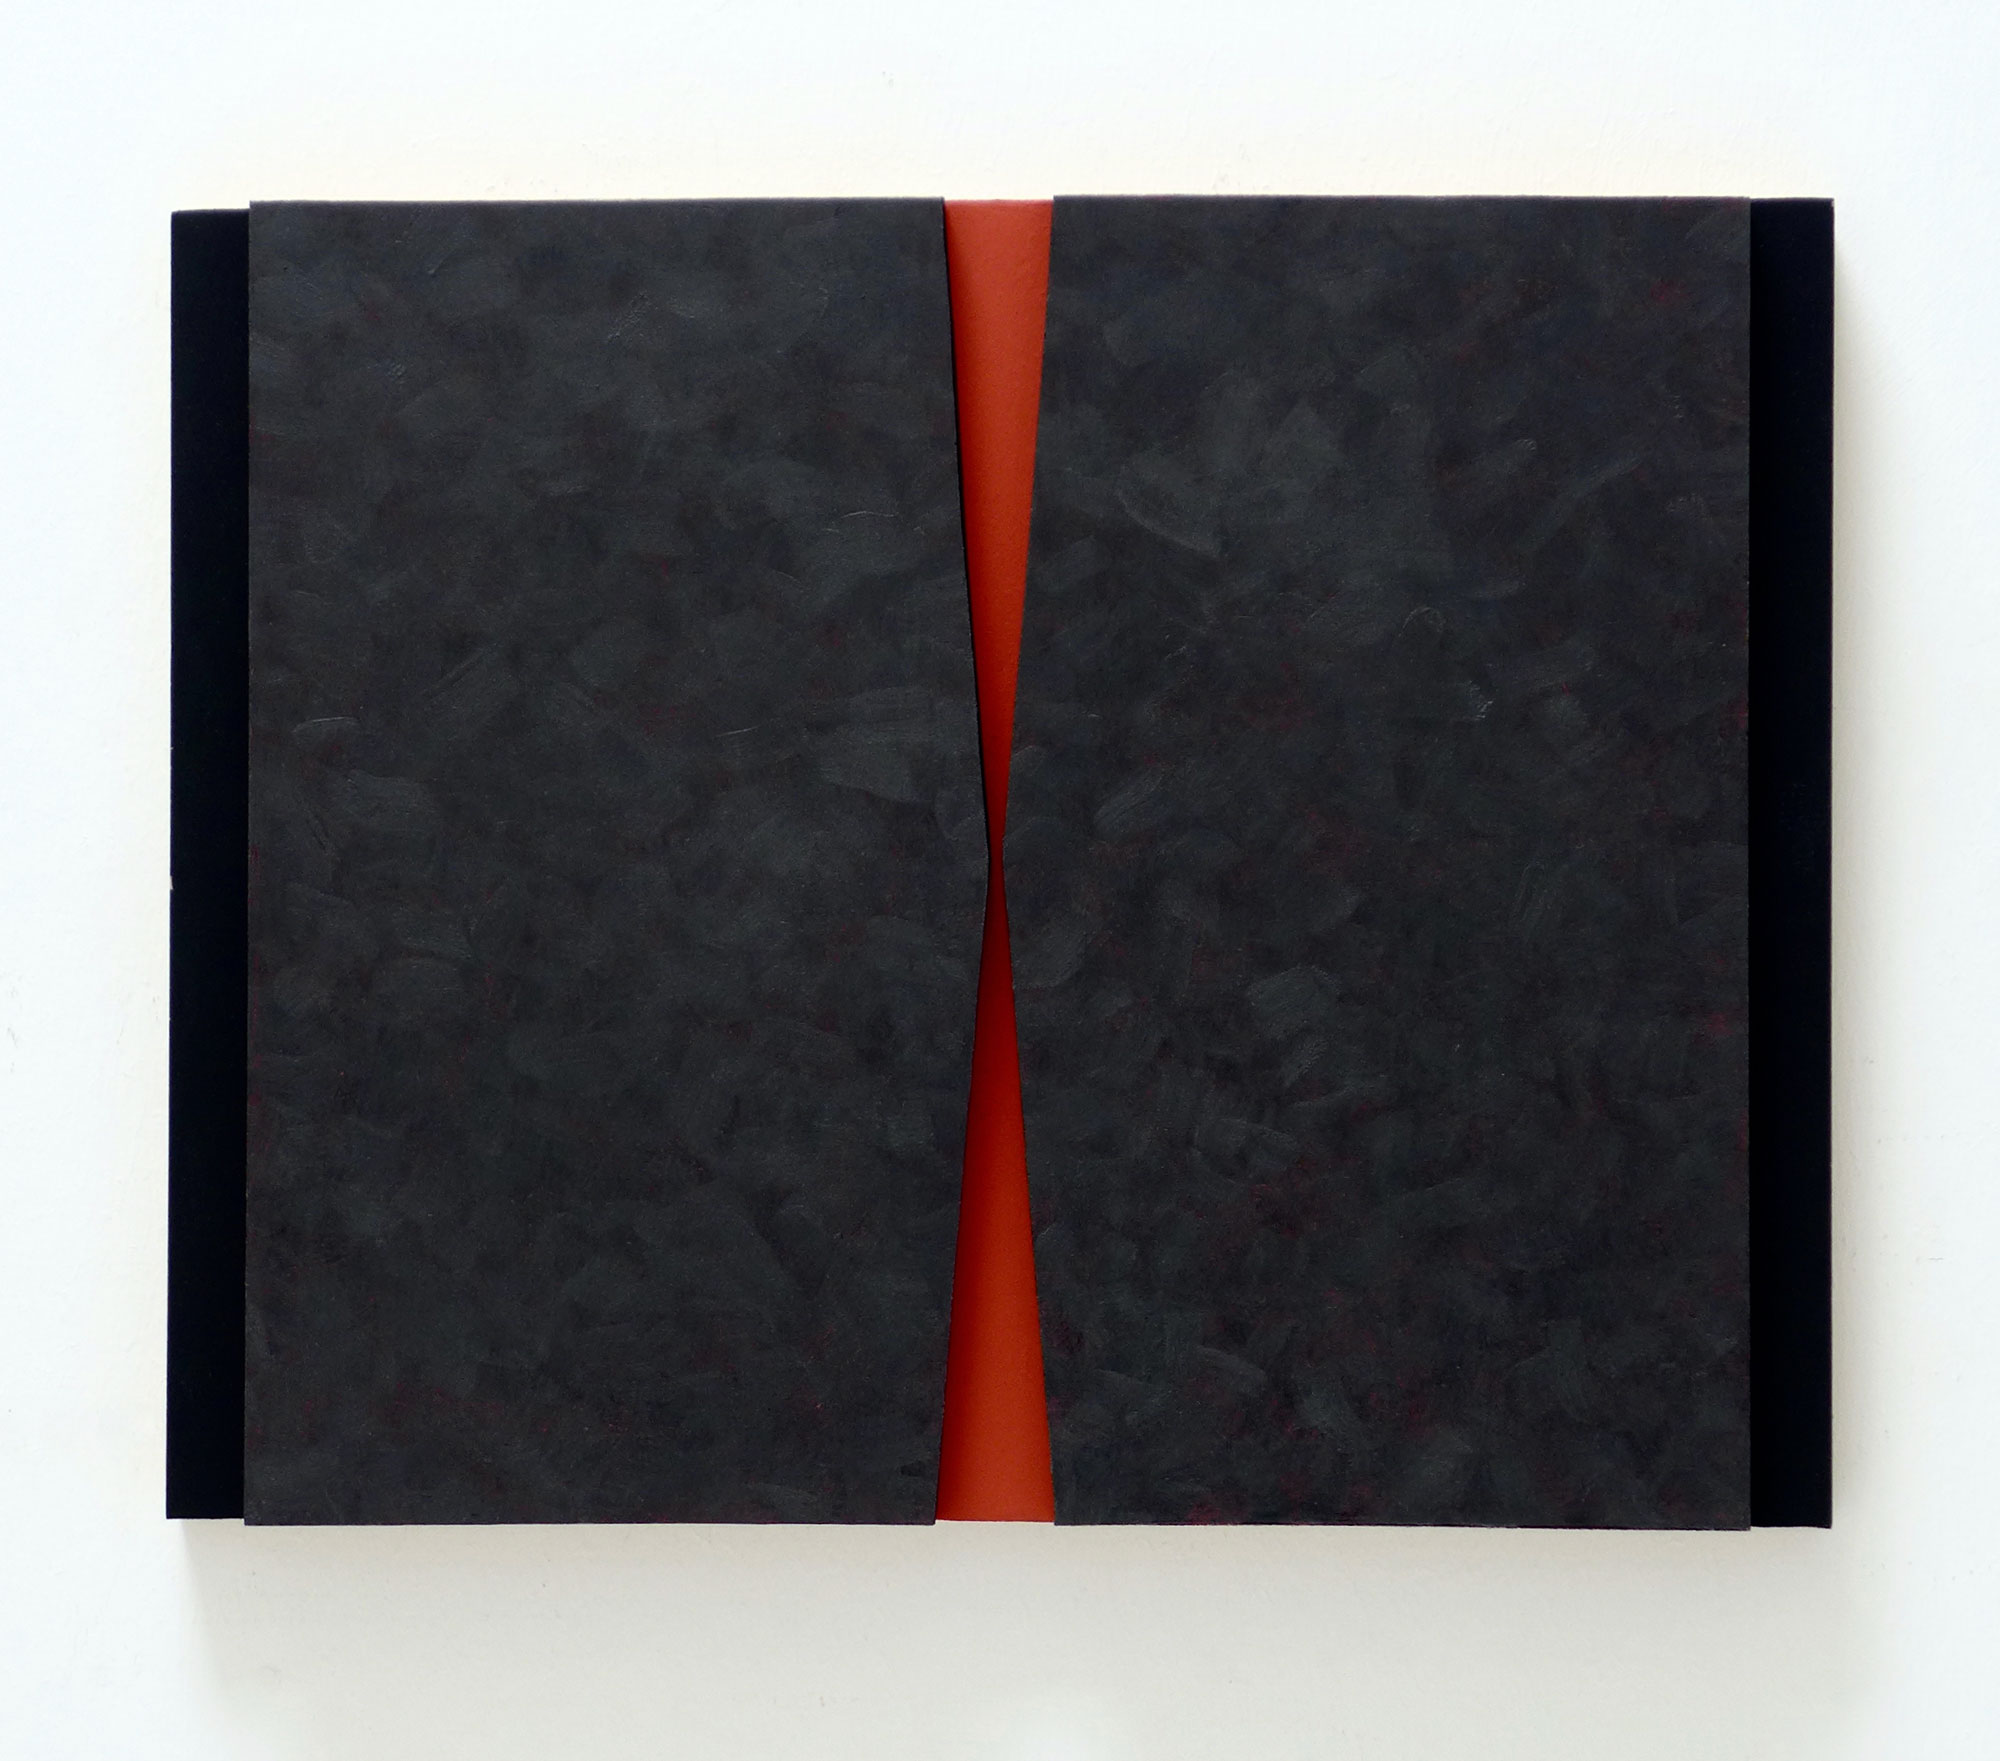 Kenneth Dingwall, Passage Series (IV), 2012, casein and graphite on wood, 30.5cm x 38.5cm x 3cm